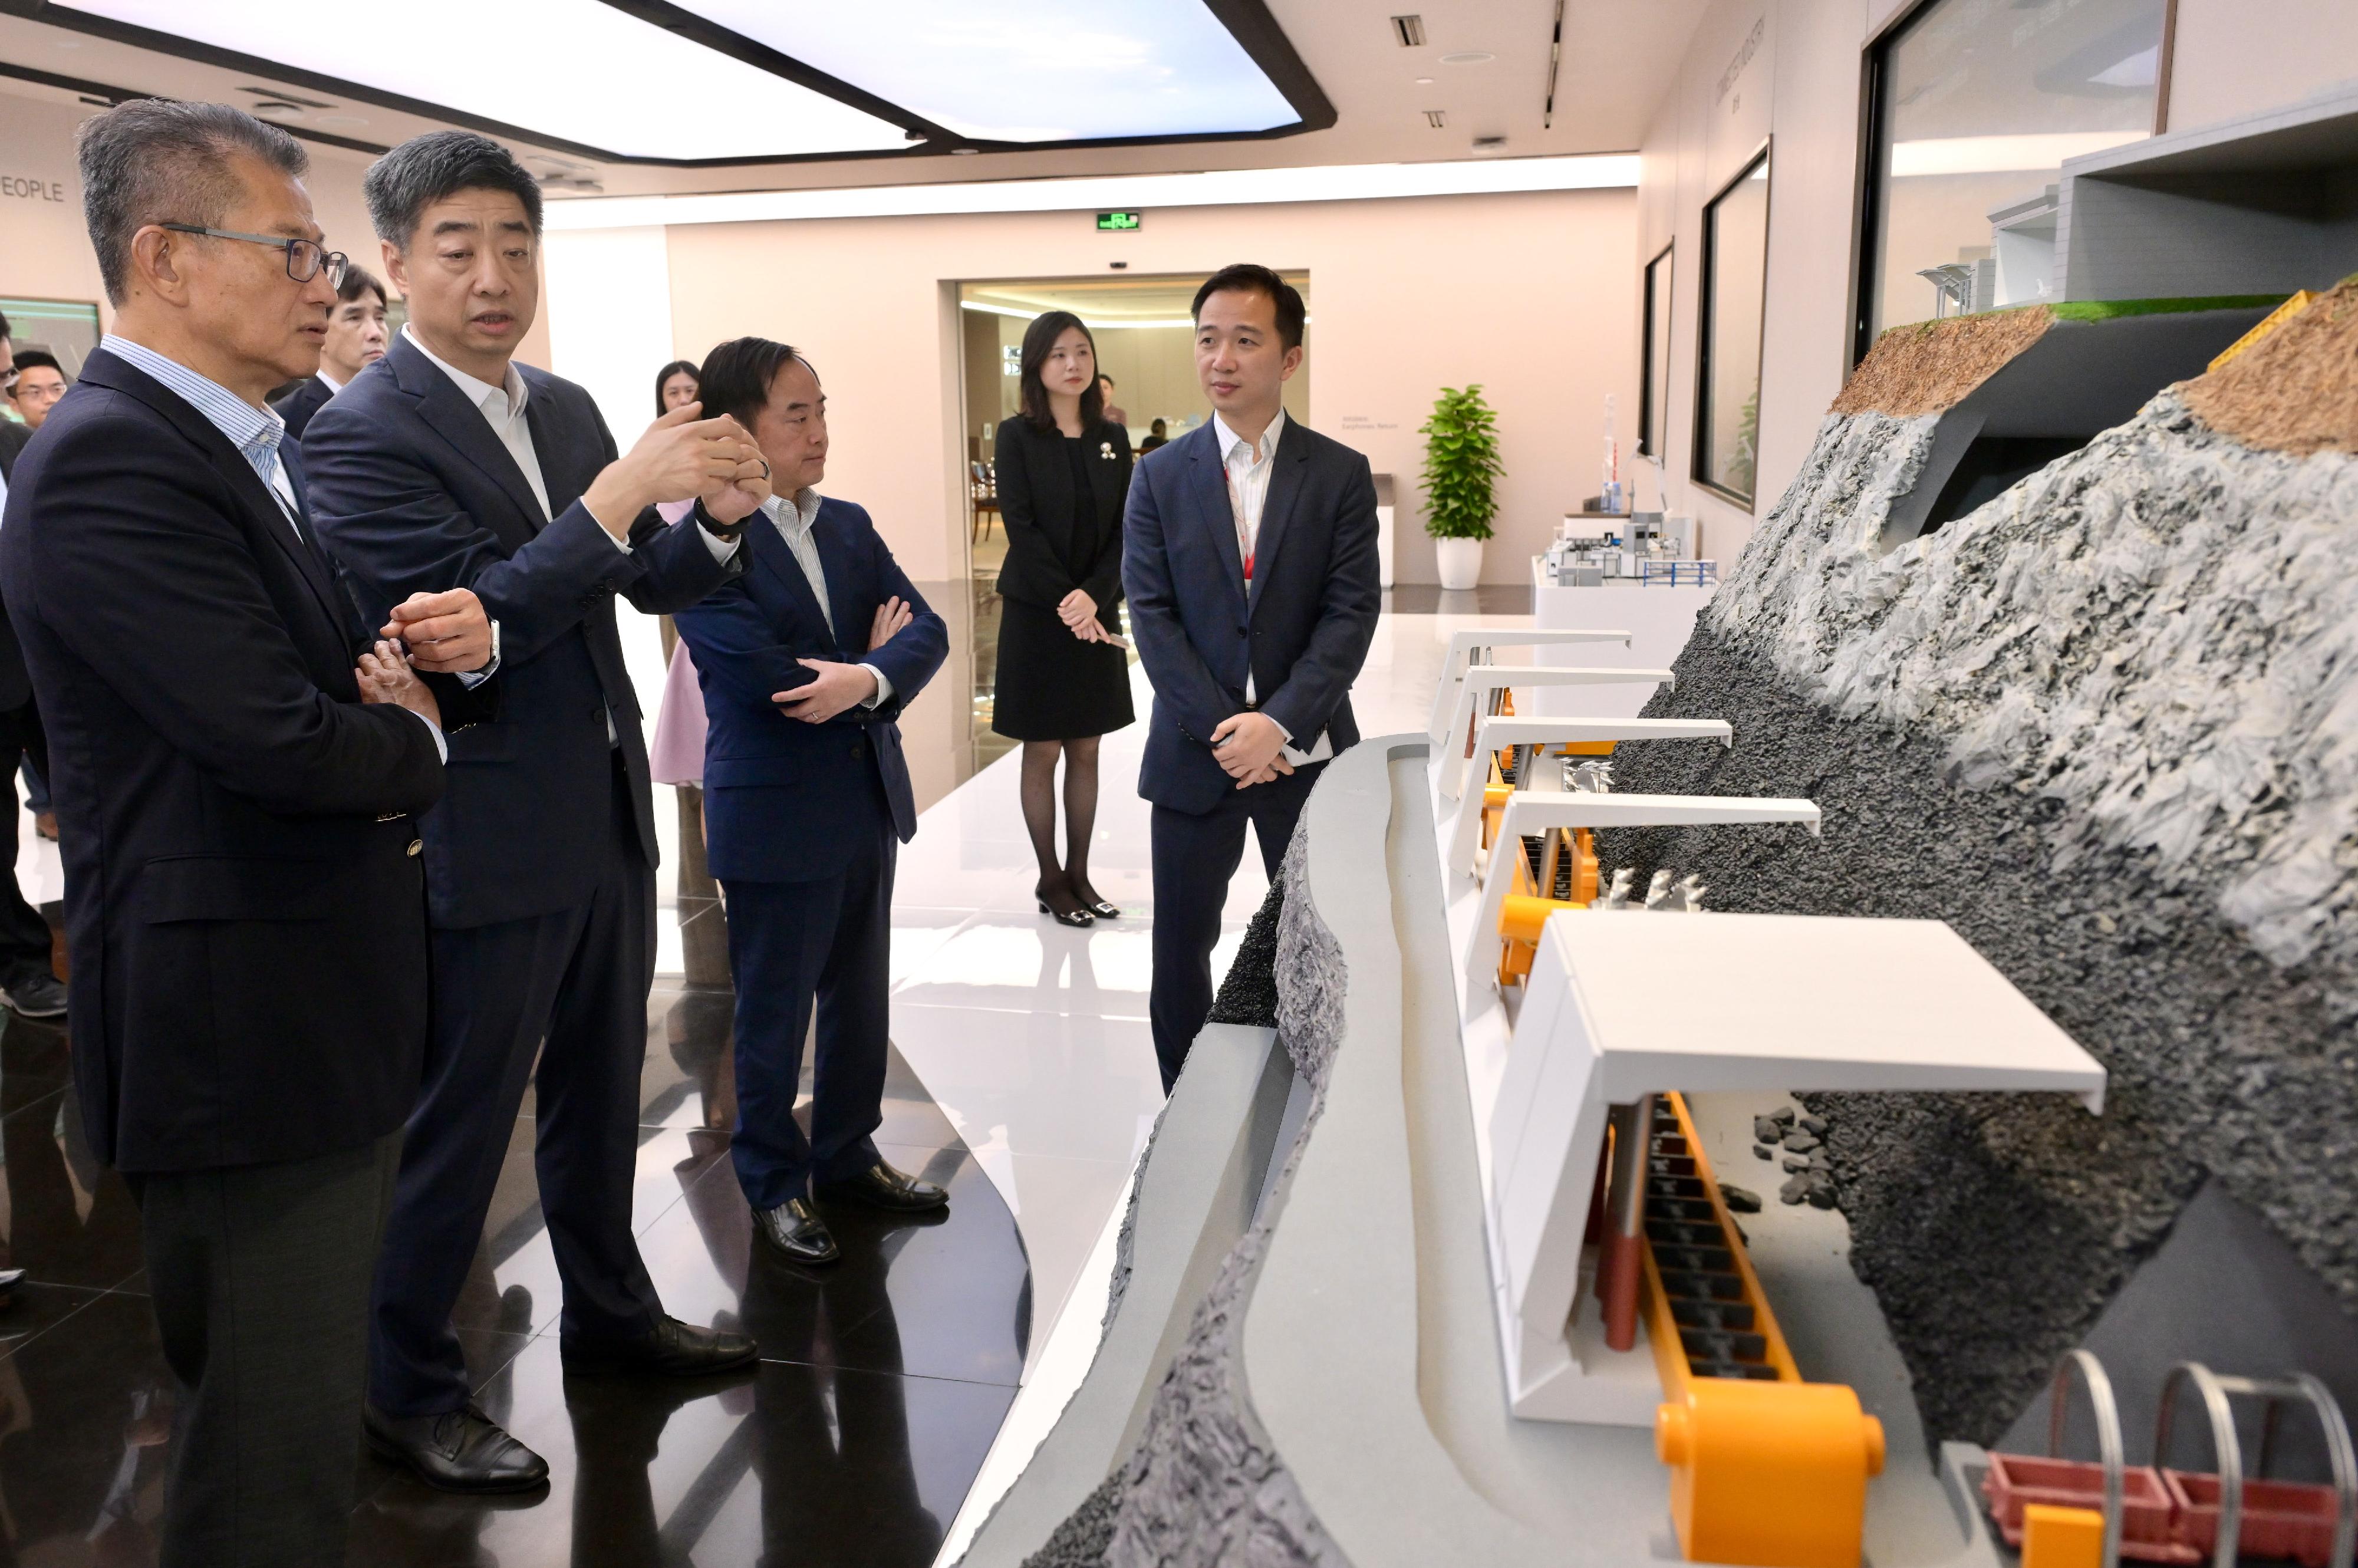 The Financial Secretary, Mr Paul Chan, started his visit programme in Shanghai today (July 5). Photo shows Mr Chan (first left), accompanied by the Government Chief Information Officer, Mr Tony Wong (third left), and Deputy Chairman of the Board and Rotating Chairman of Huawei Mr Hu Houkun (second left), touring the Shanghai Research Center of Huawei.